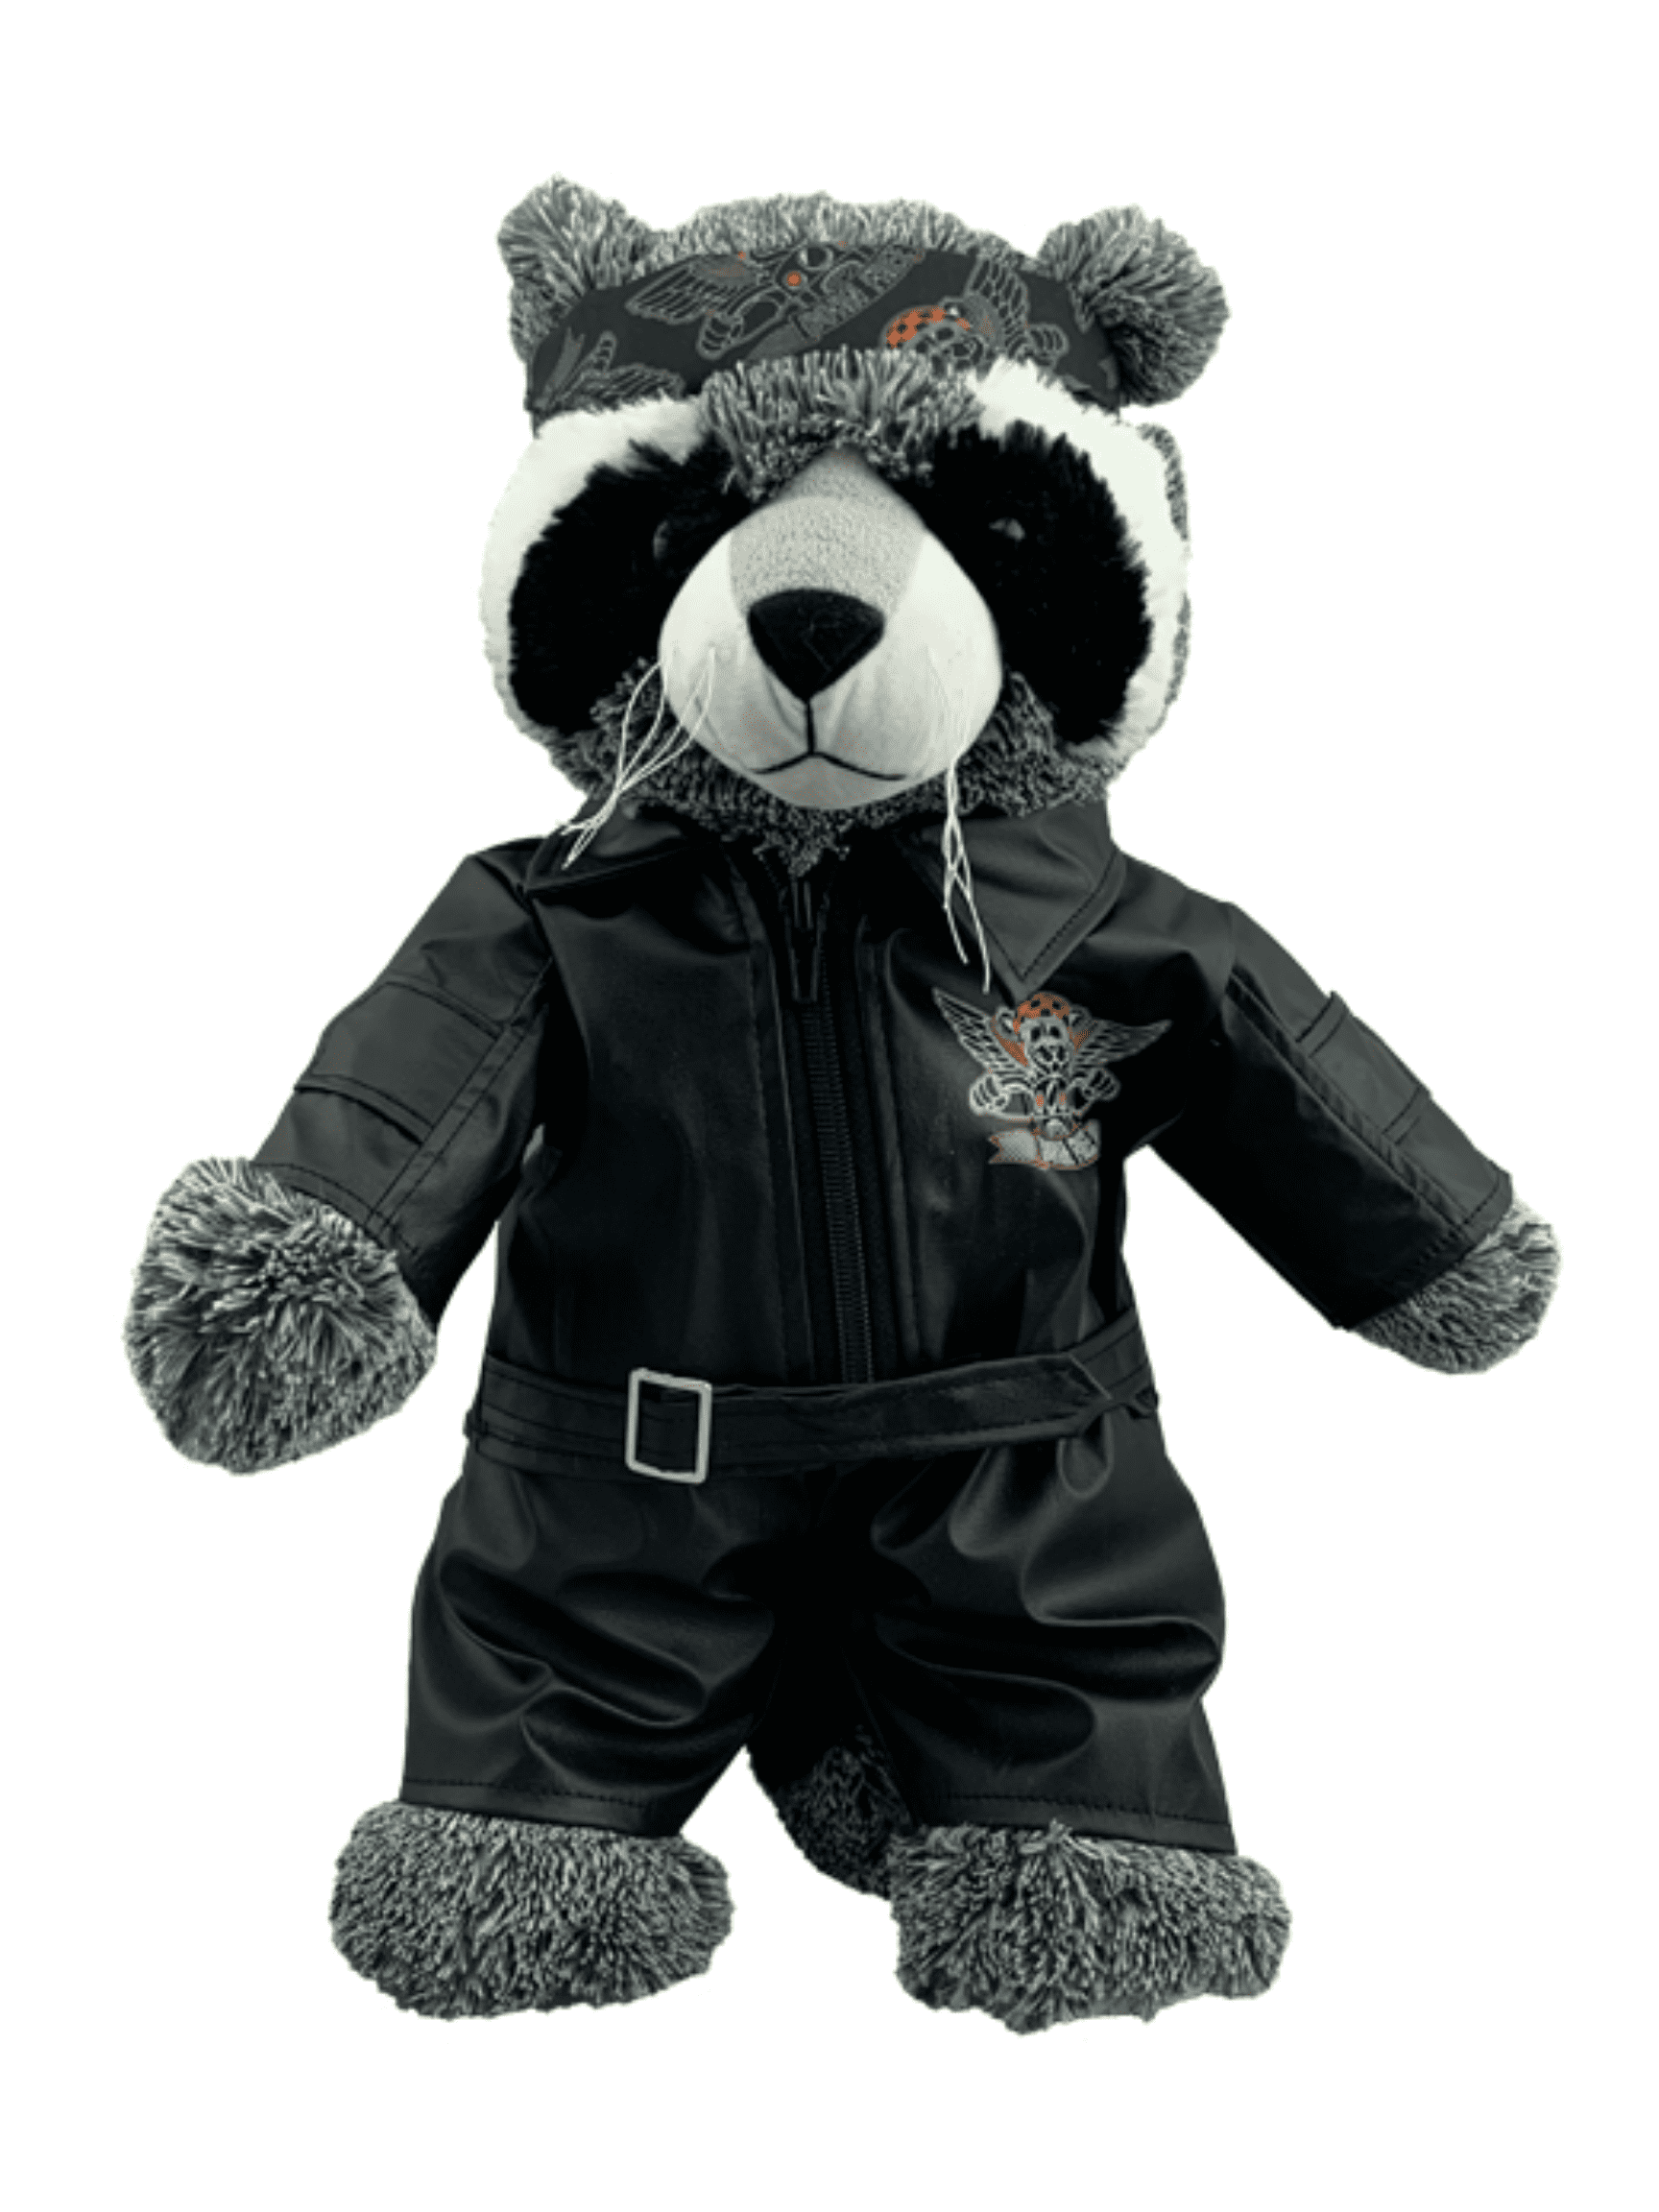 Safari Outfit Teddy Bear Clothes Fits Most 8"-10" Build-A-Bear Buddies and Make